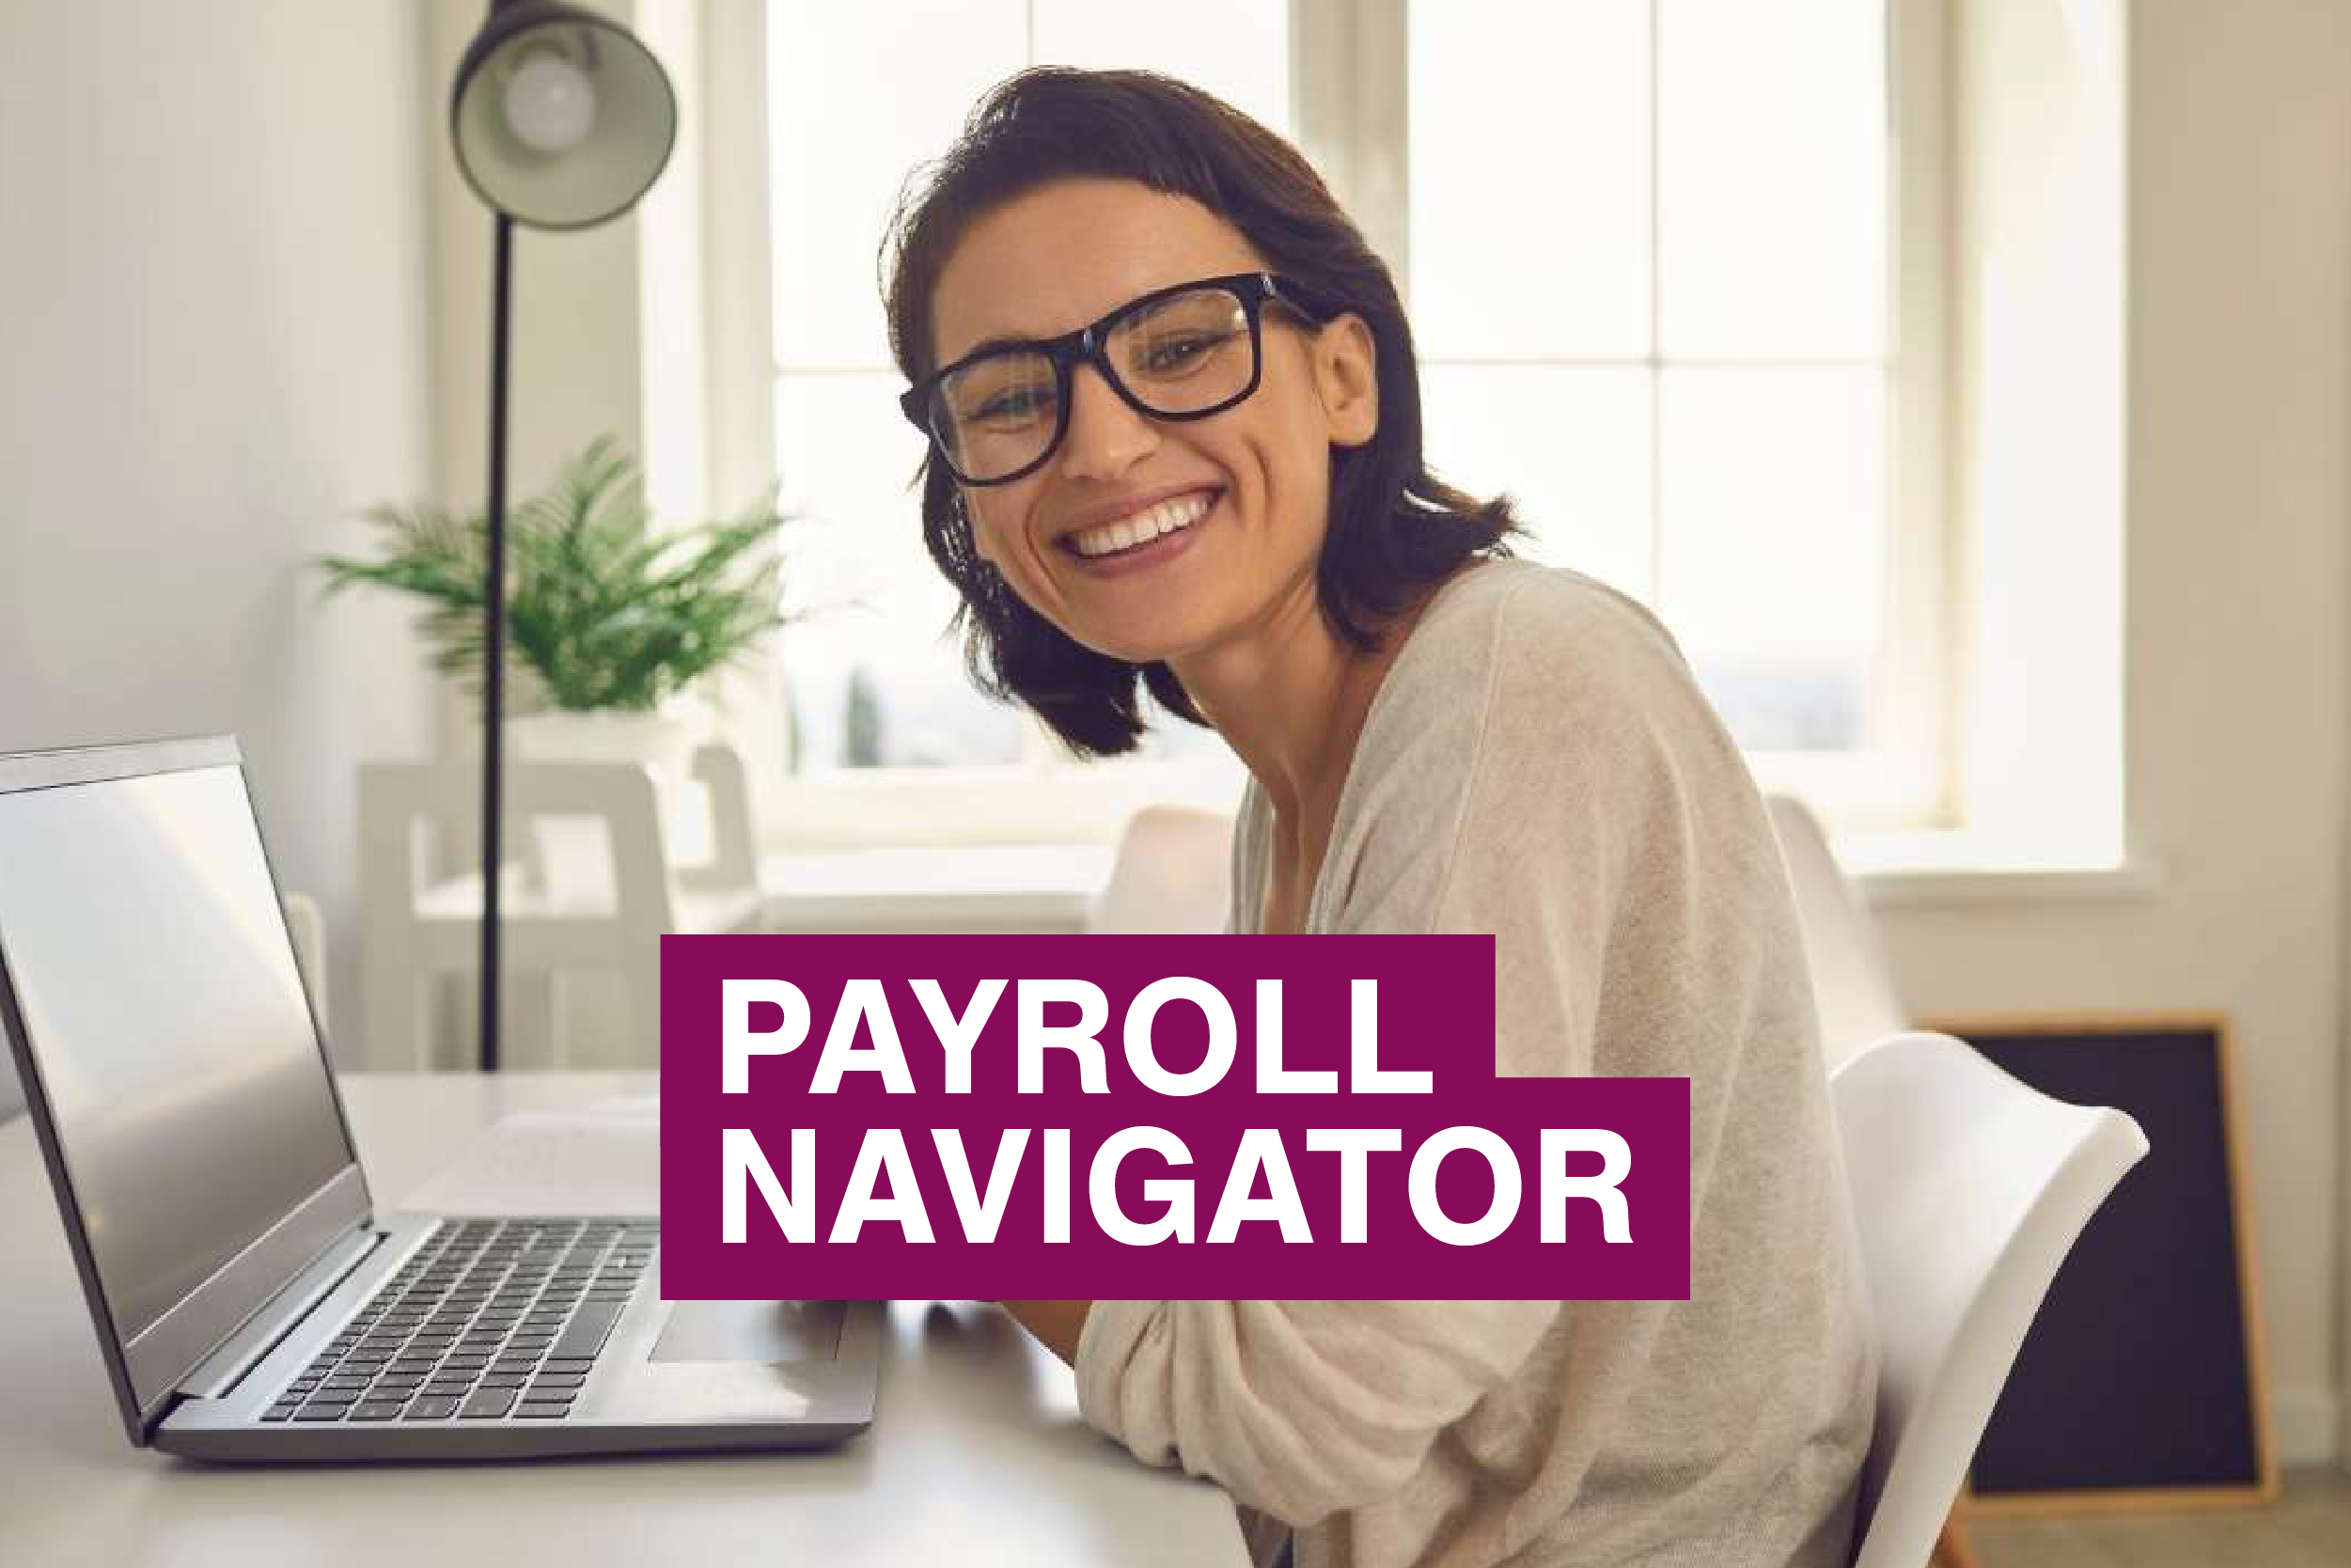 How can I support financial well-being through payroll